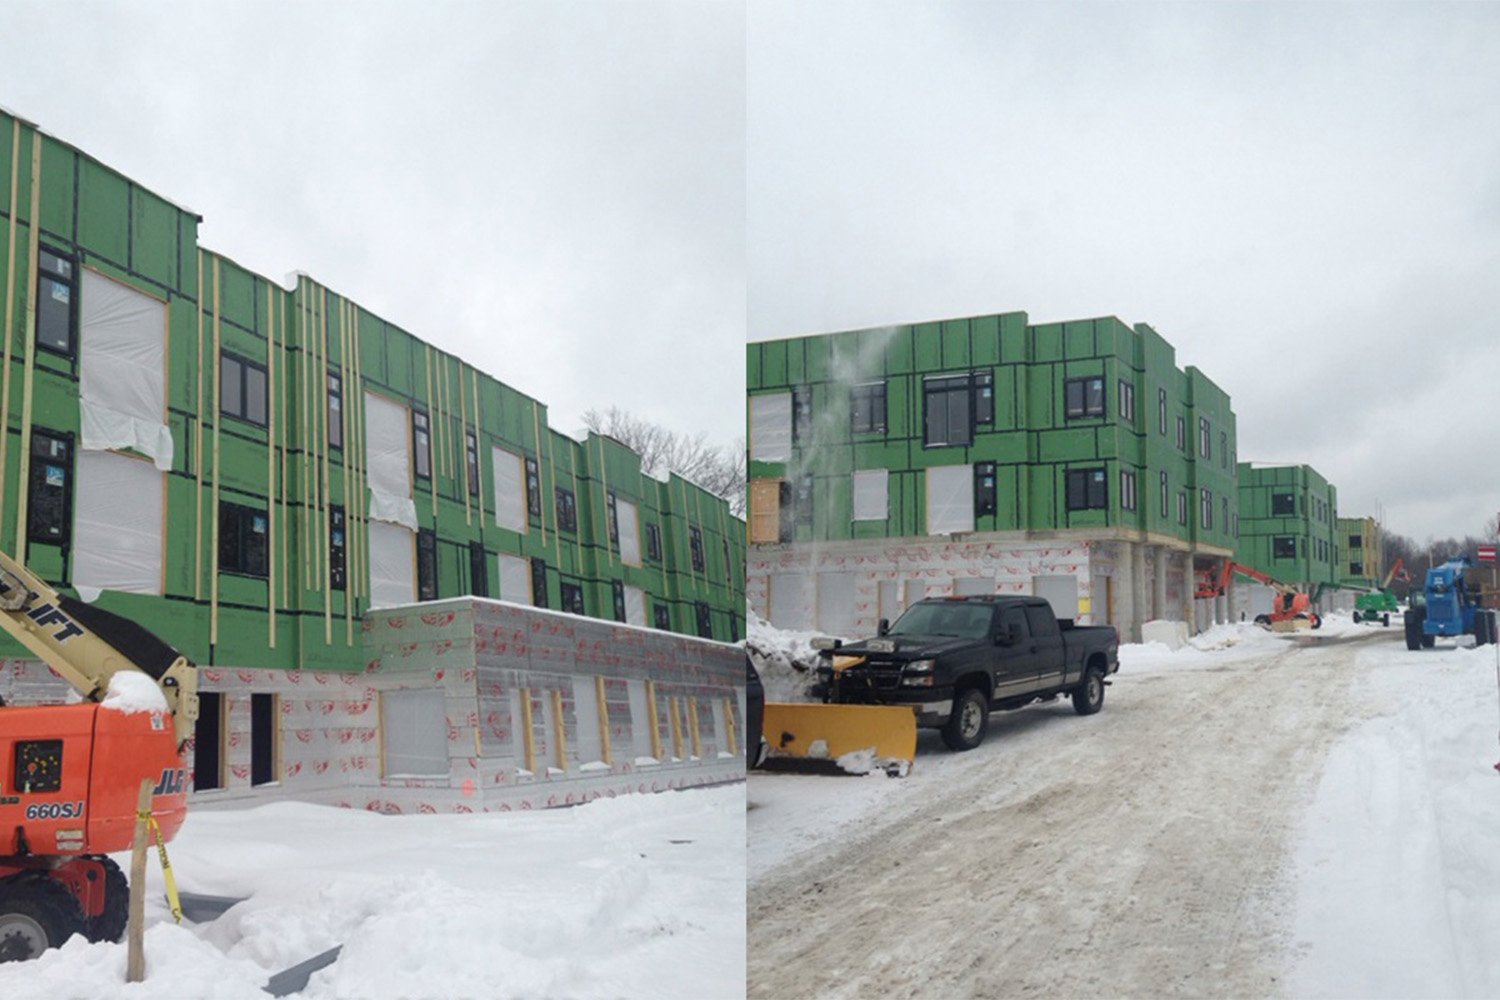 2 pictures of the Brookside Tocci construction site, with snow covered ground